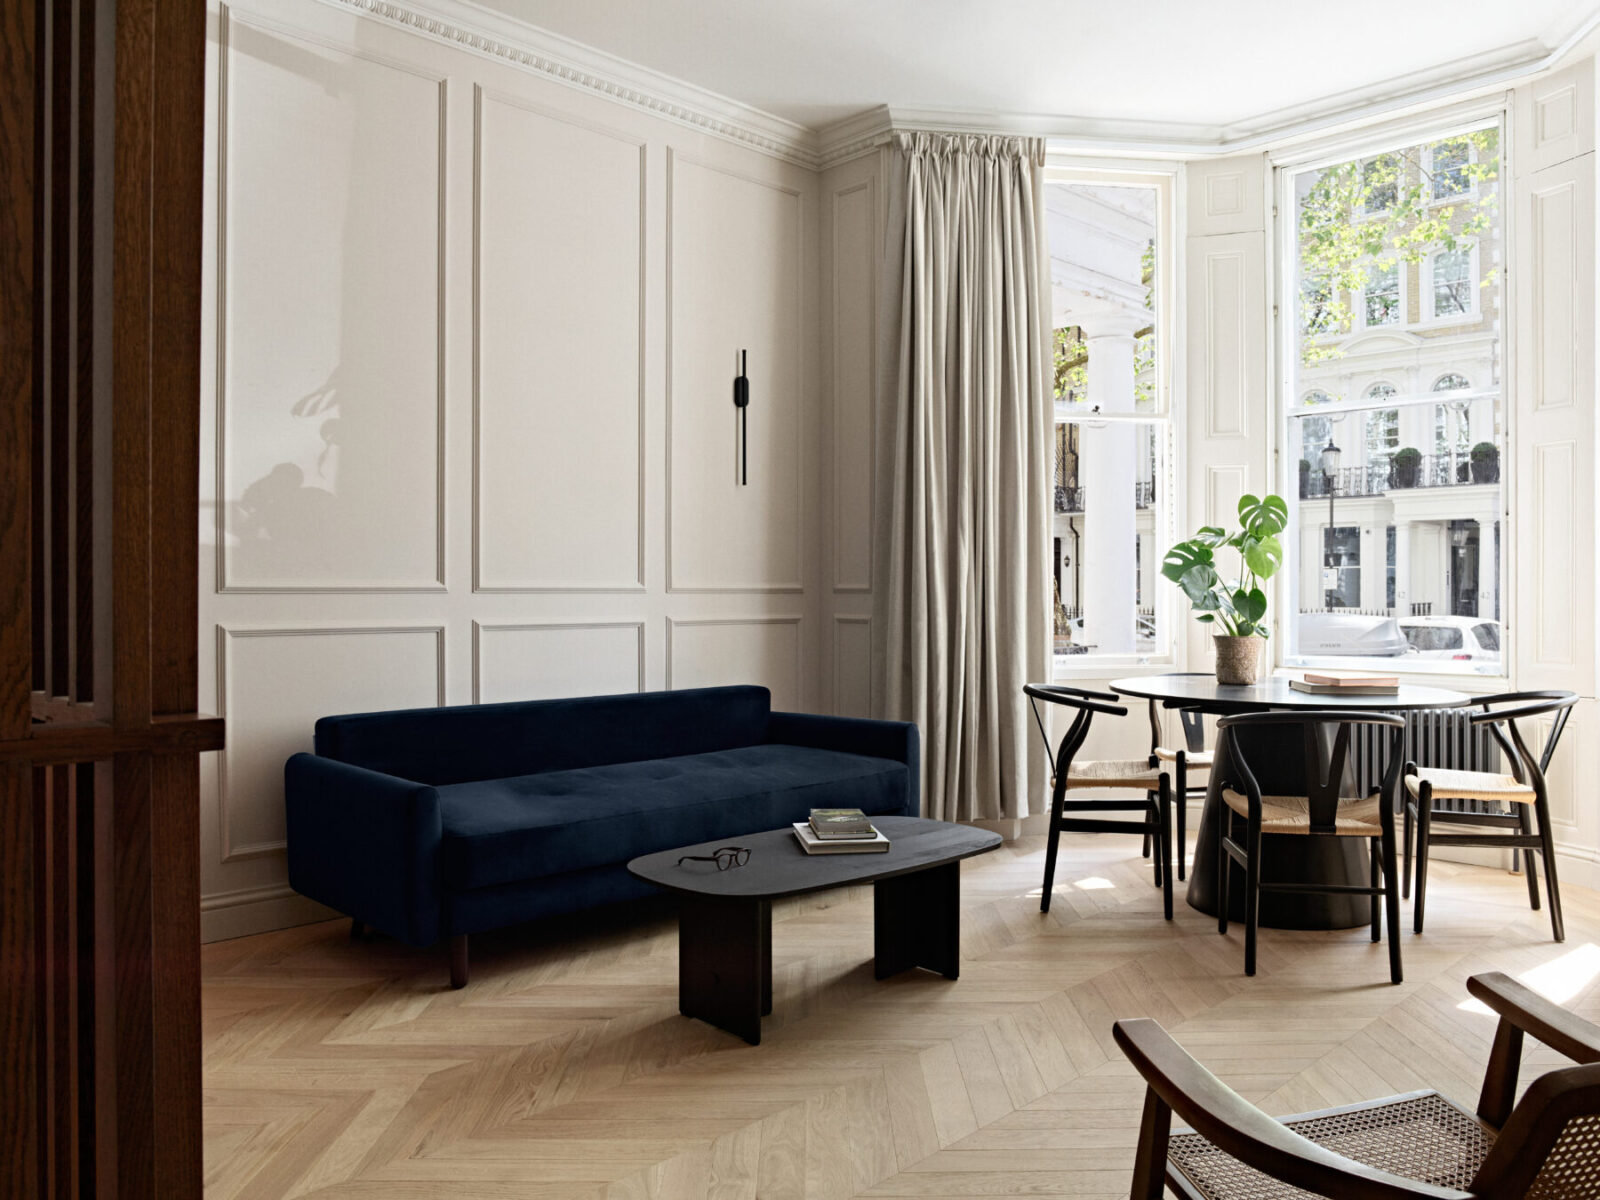 Archisearch Knightsbridge Apartment - Renovation by Georgios Apostolopoulos Architects, in collaboration with Manuel Gonzalez and Vasilis Tsesmetzis, in London